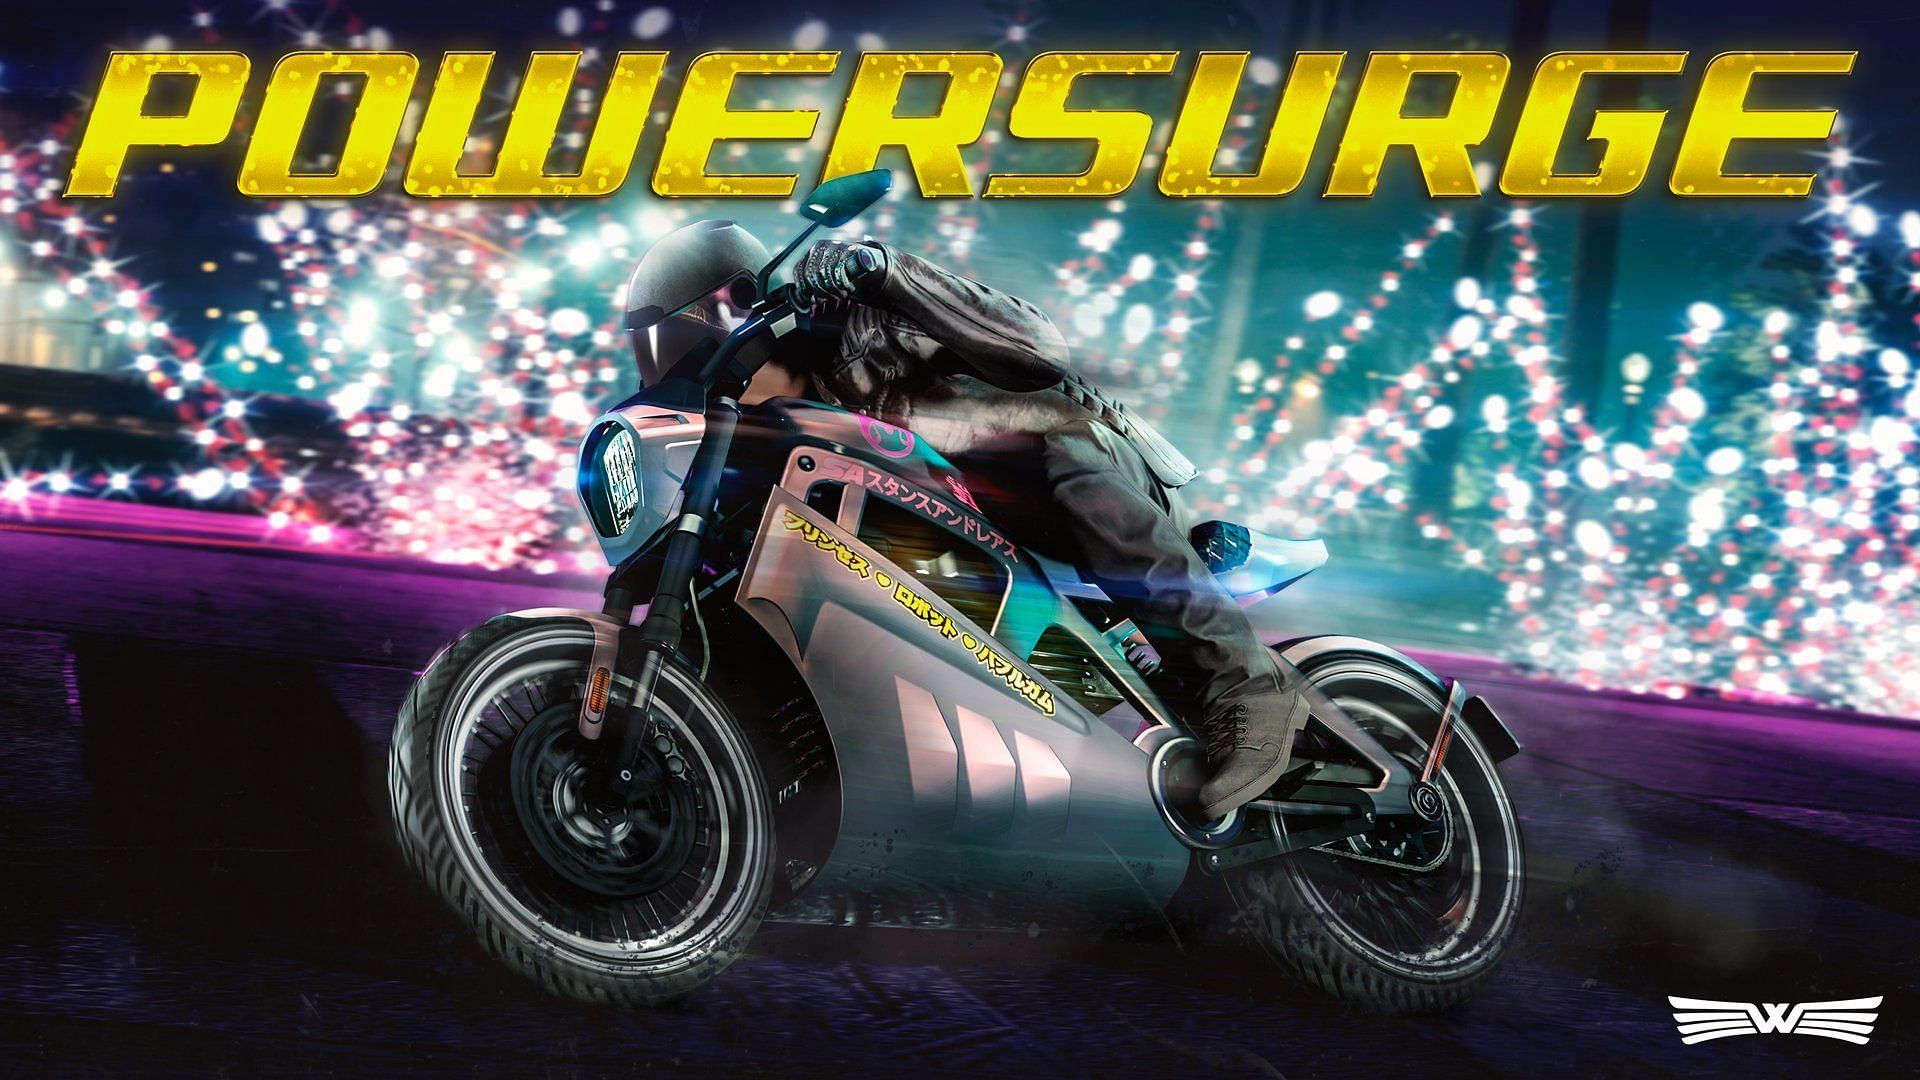 This is the official image used for this motorcycle (Image via Rockstar Games)